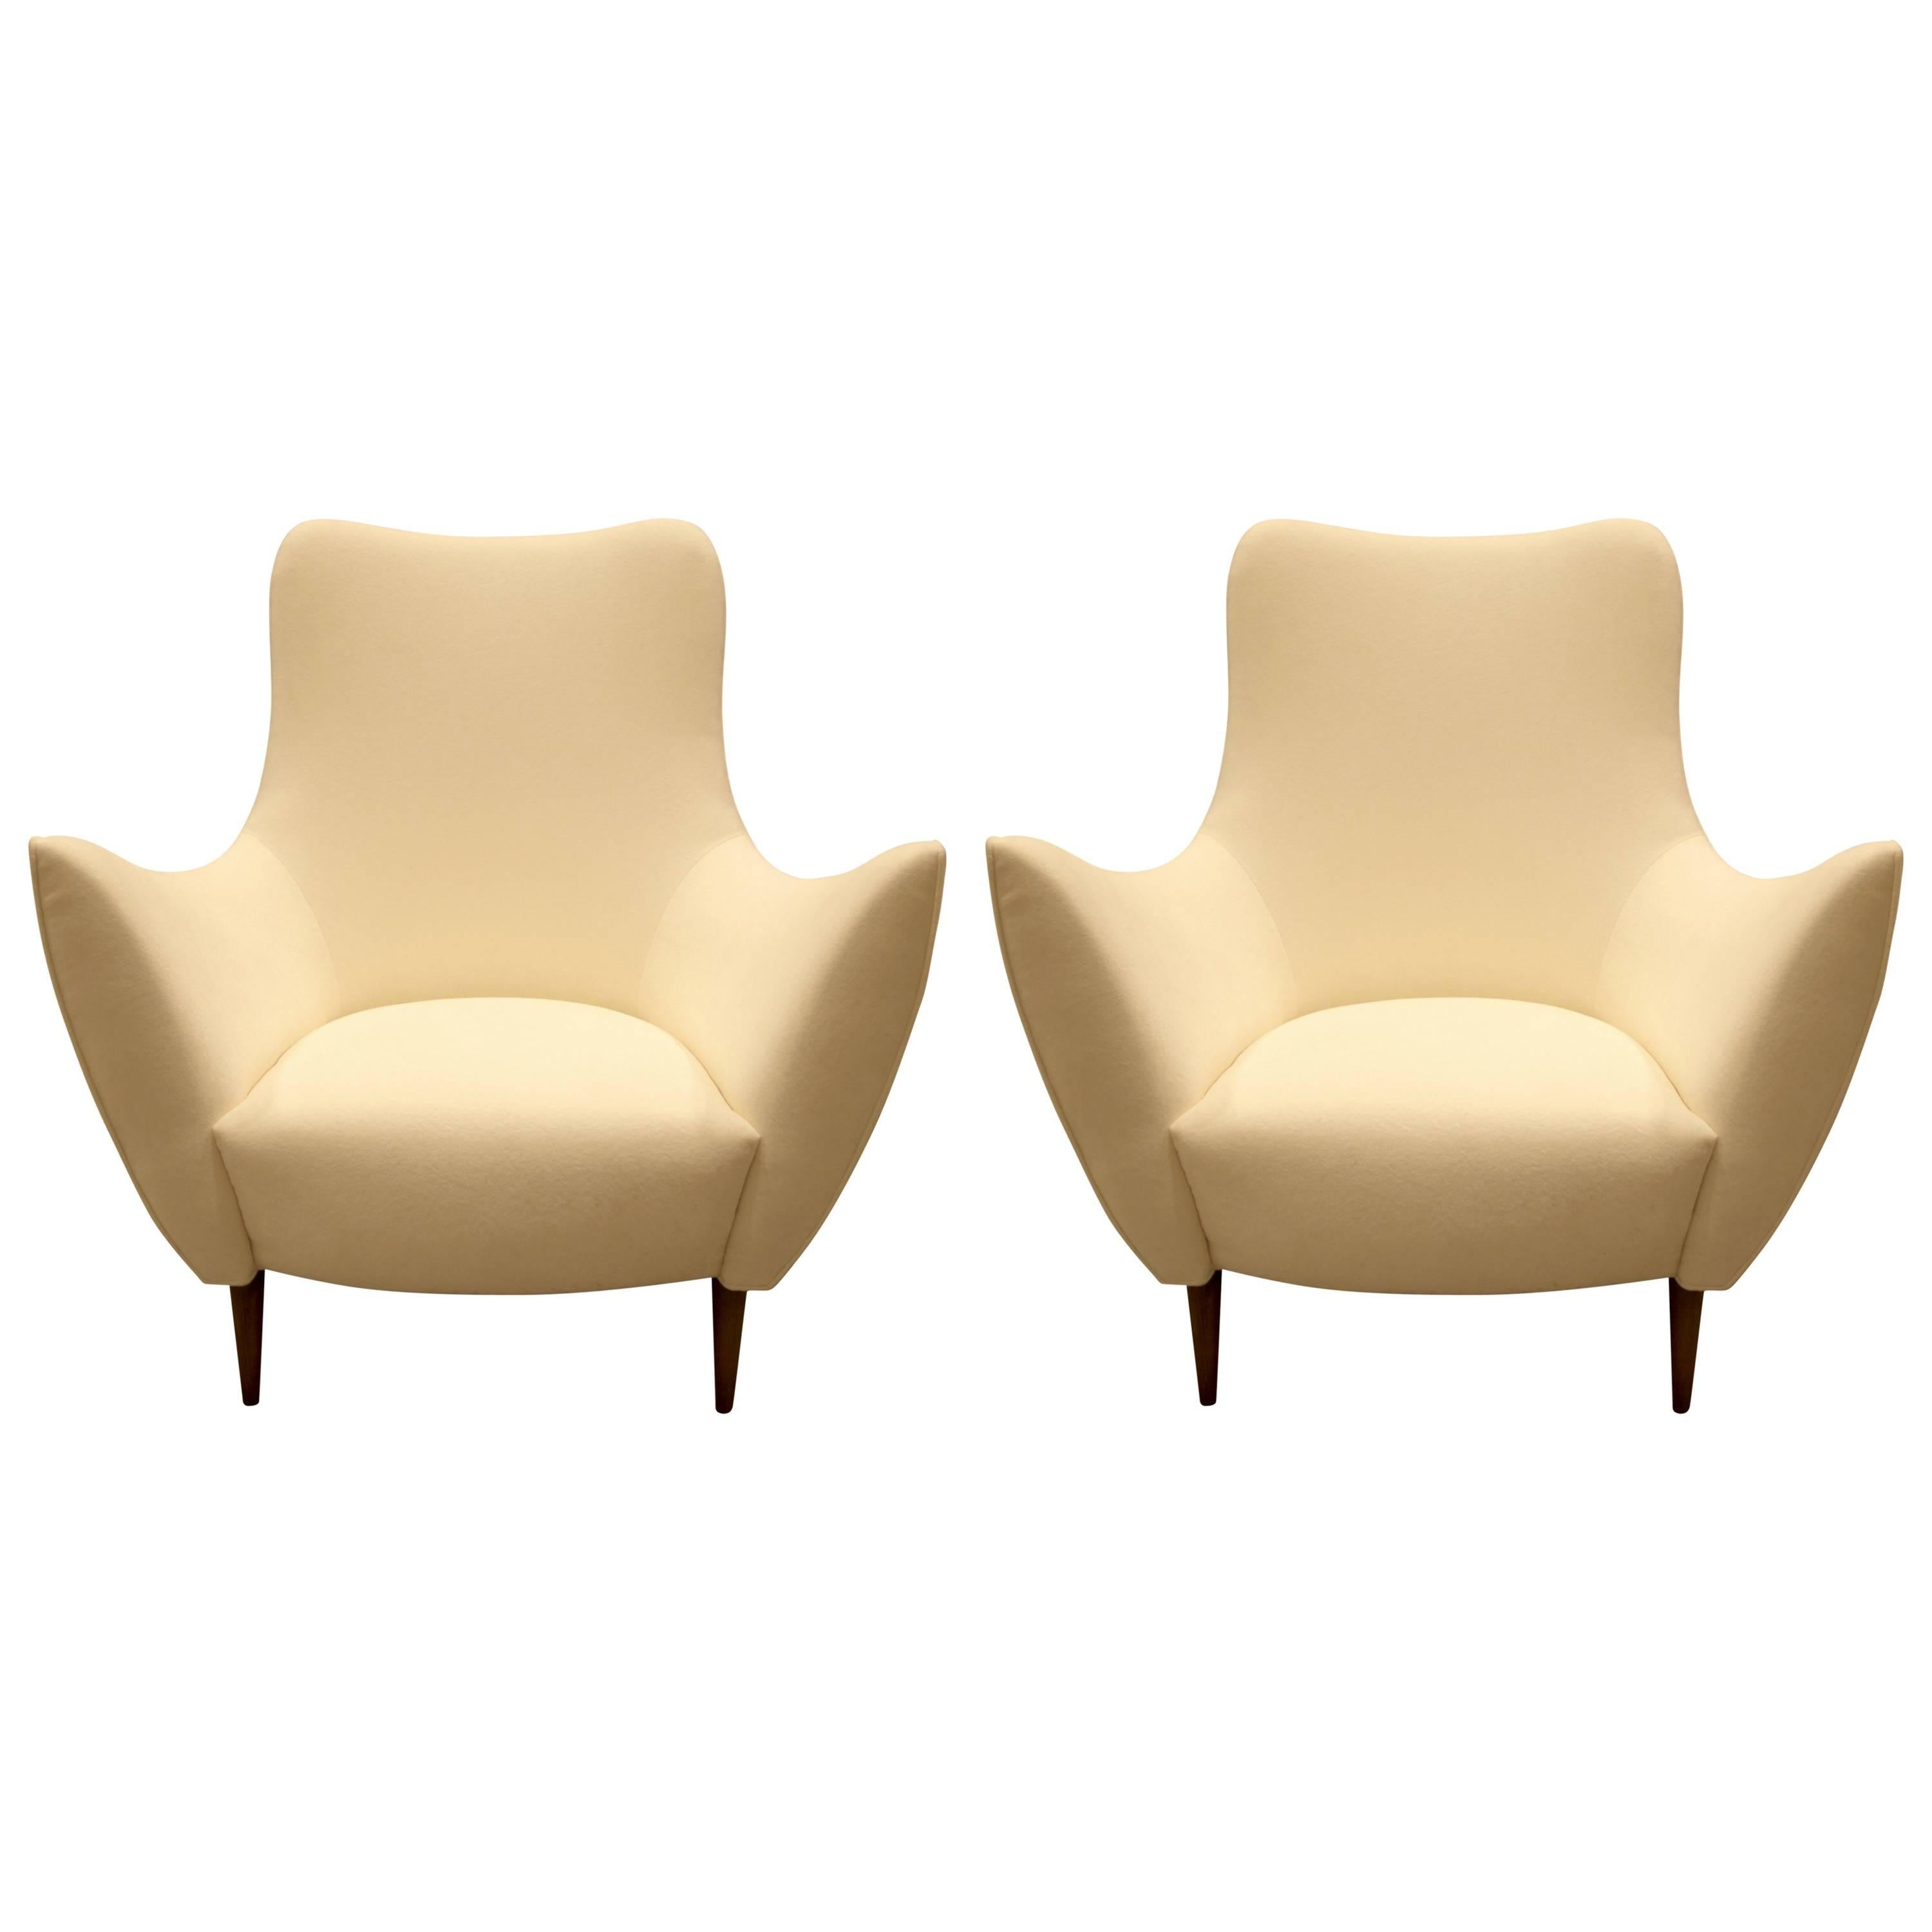 Pair of Midcentury Style Ivory Italian Lounge or Armchairs with Flared Arms